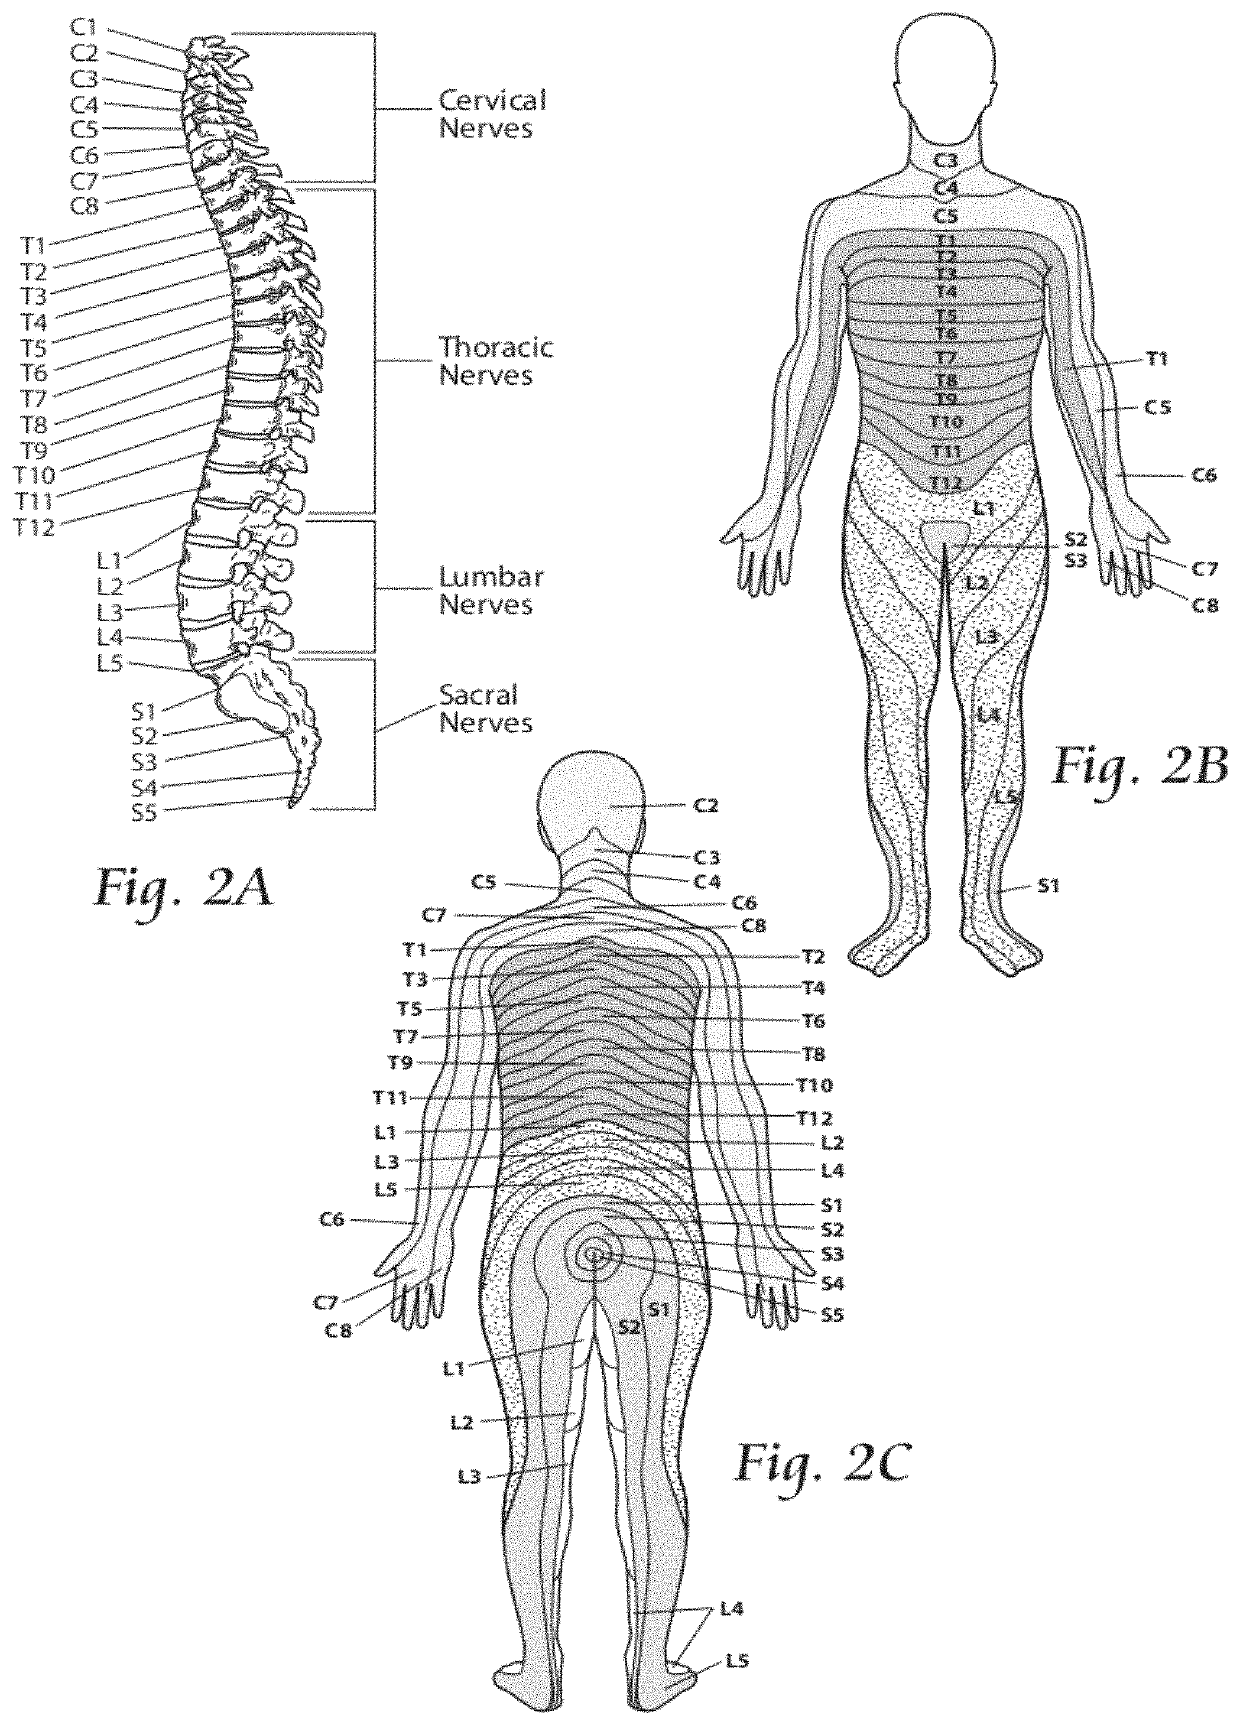 Systems and methods to place one or more leads in tissue to electrically stimulate nerves to treat pain